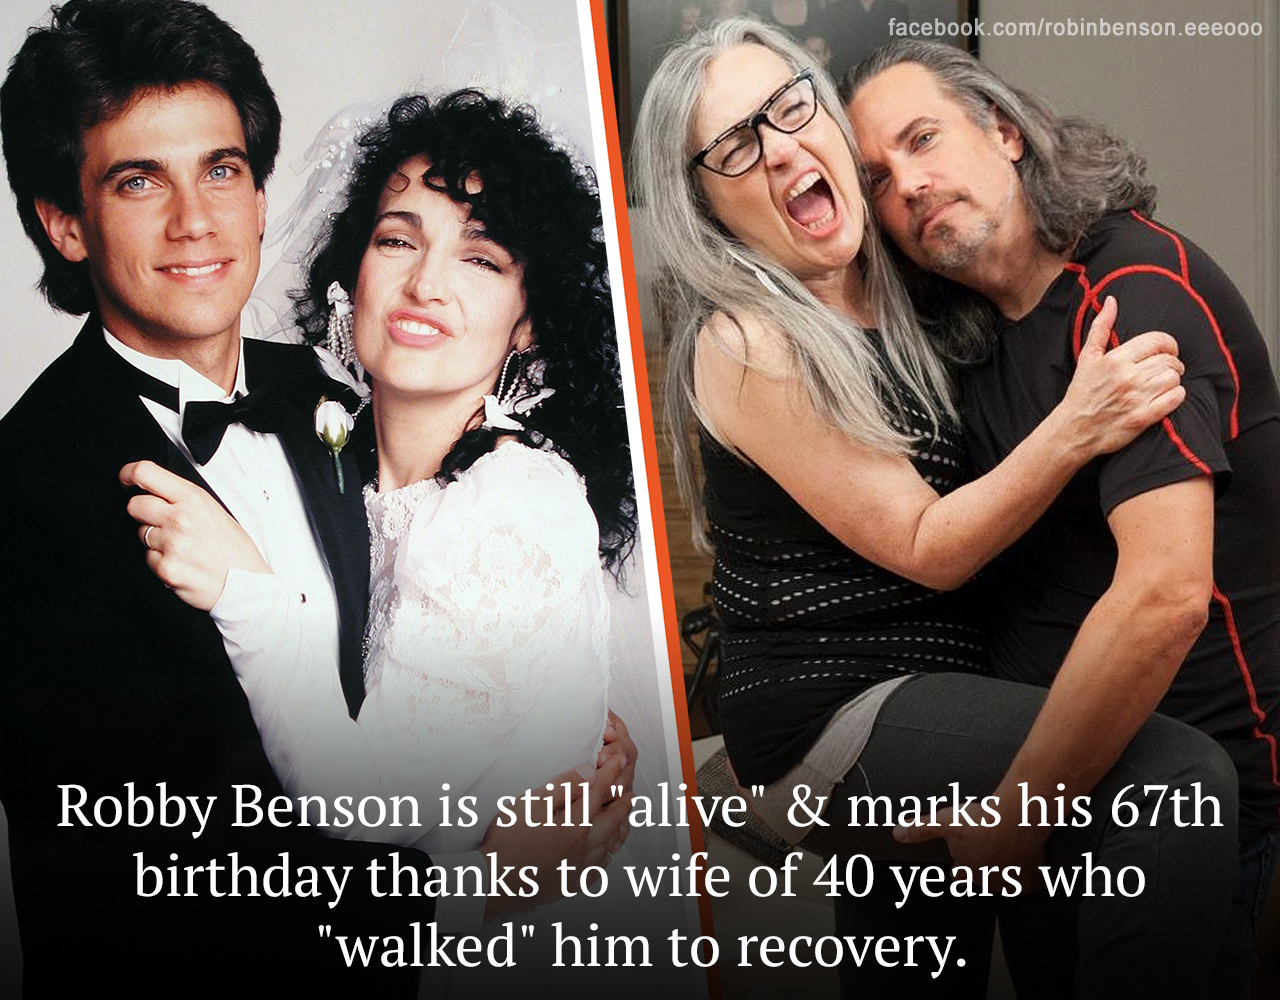 ’70s teen idol Robby Benson, who was the voice of Beast in the animated classic “Beauty and the Beast,” and starred in “Ice Castles” and “The Chosen,” proposed to singer Karla DeVito after only two months of courtship